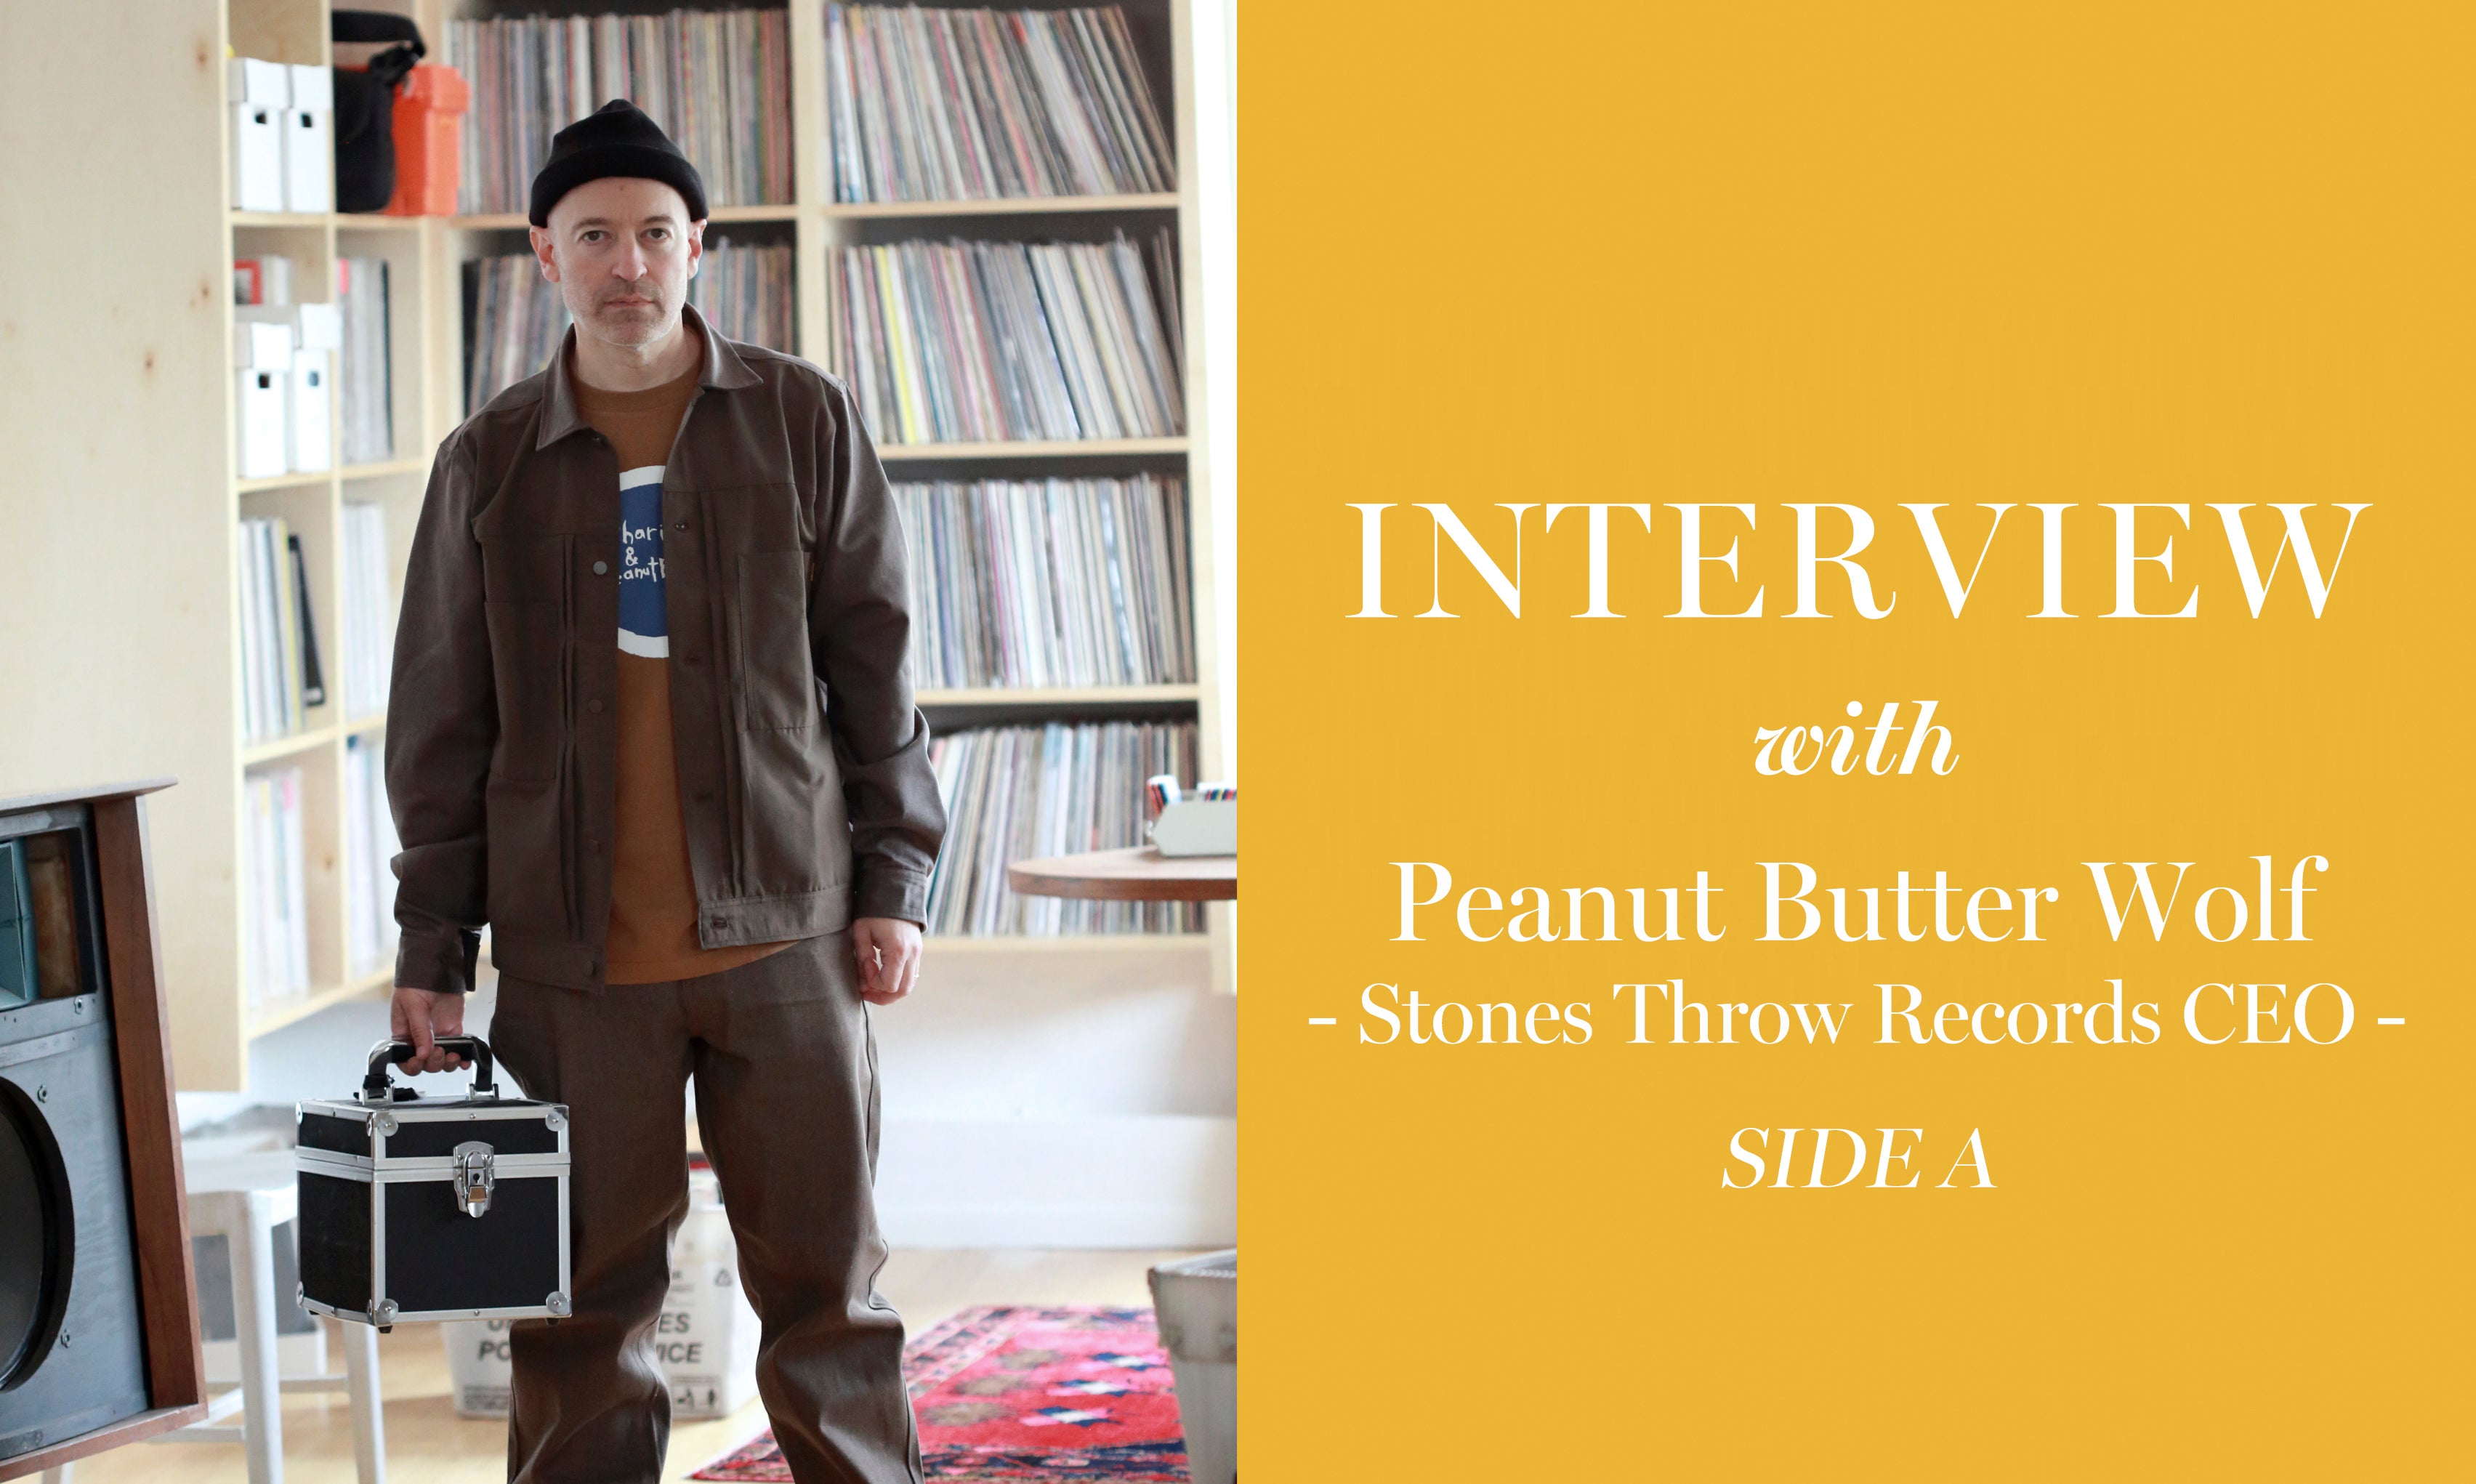 KNOW THE LEDGE / INTERVIEW WITH PEANUT BUTTER WOLF - SIDE A - – UNION TOKYO